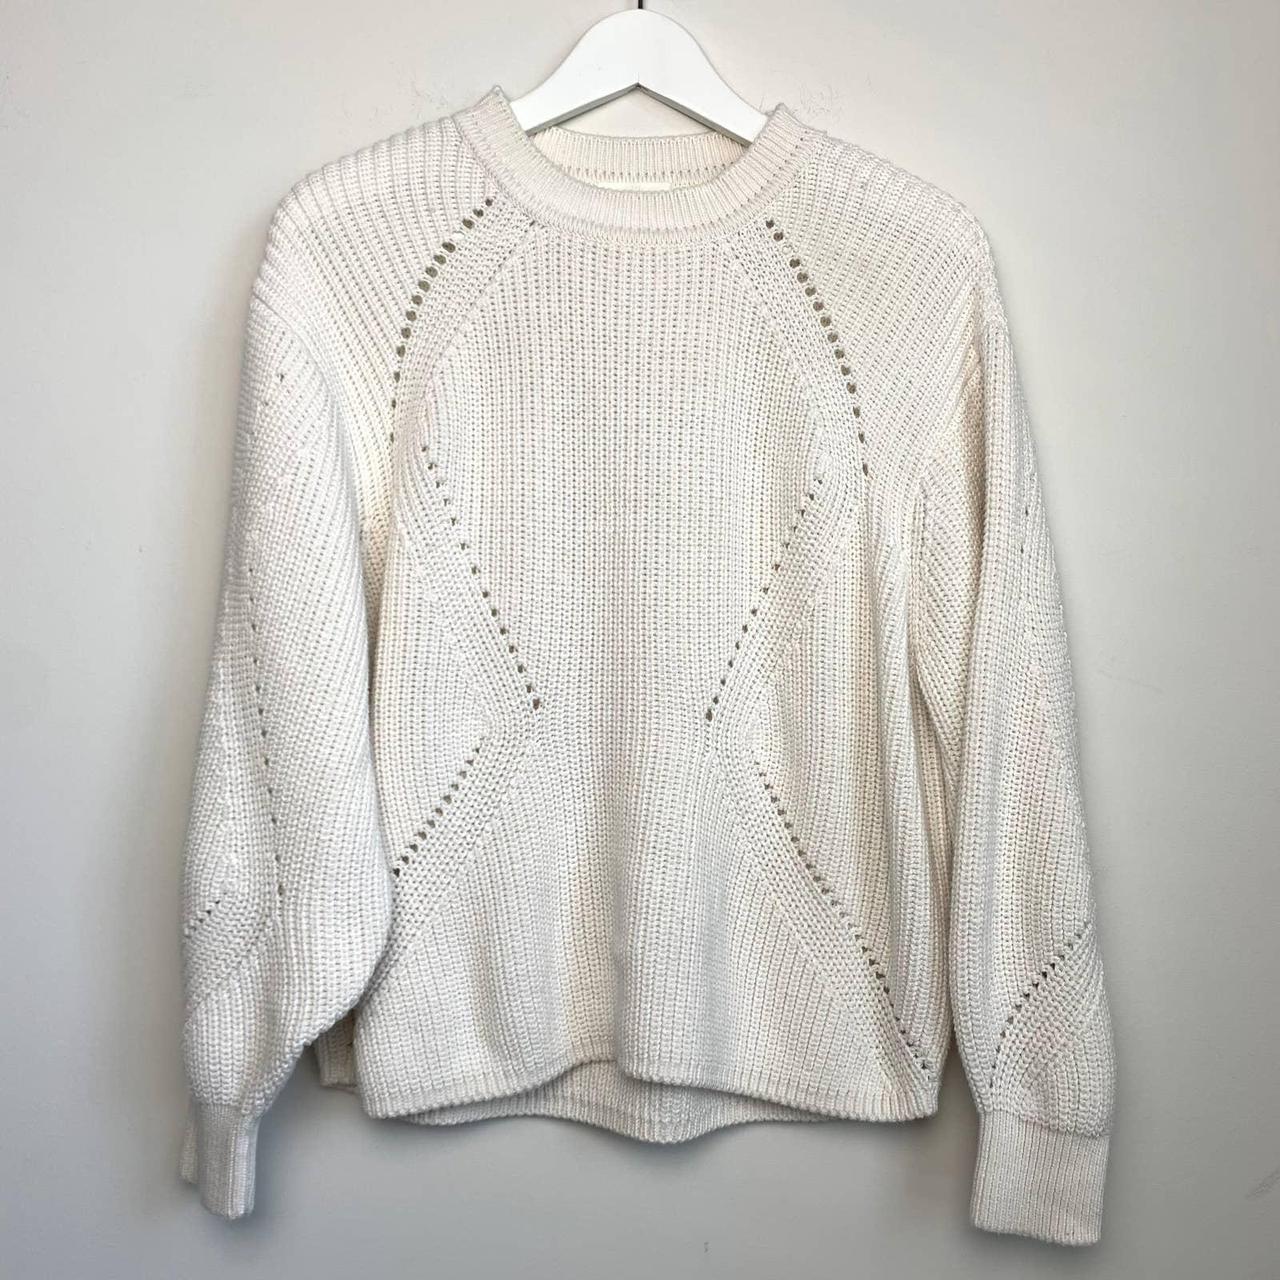 White chunky knit sweater from H&M is the perfect... - Depop